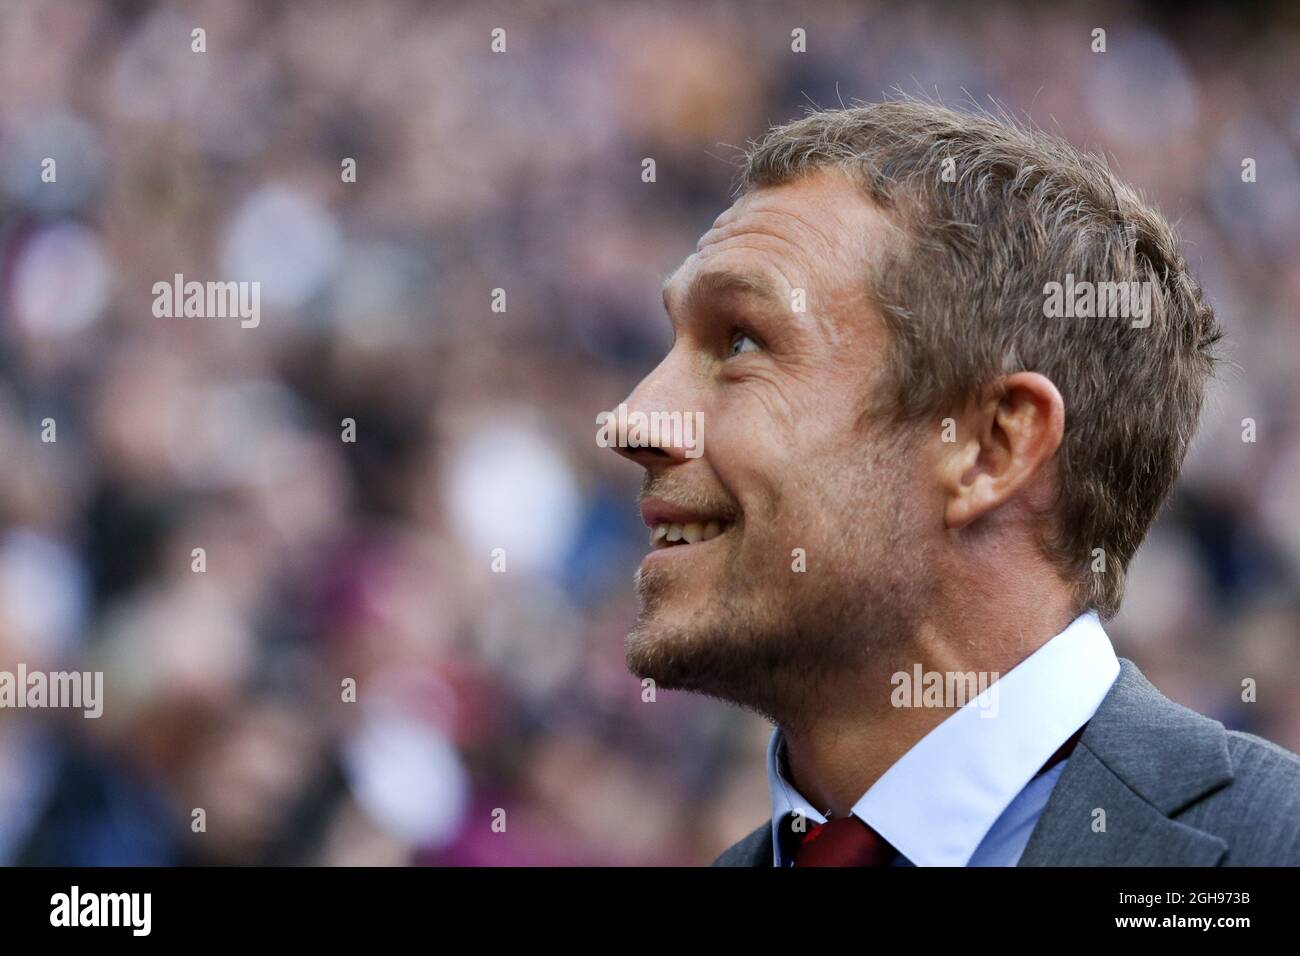 Jonny Wilkinson makes an appearance with the rest of the 2003 World Cup winning team during the QBE Autumn International match between England and Australia at Twickenham Stadium in London on November 2, 2013. Stock Photo